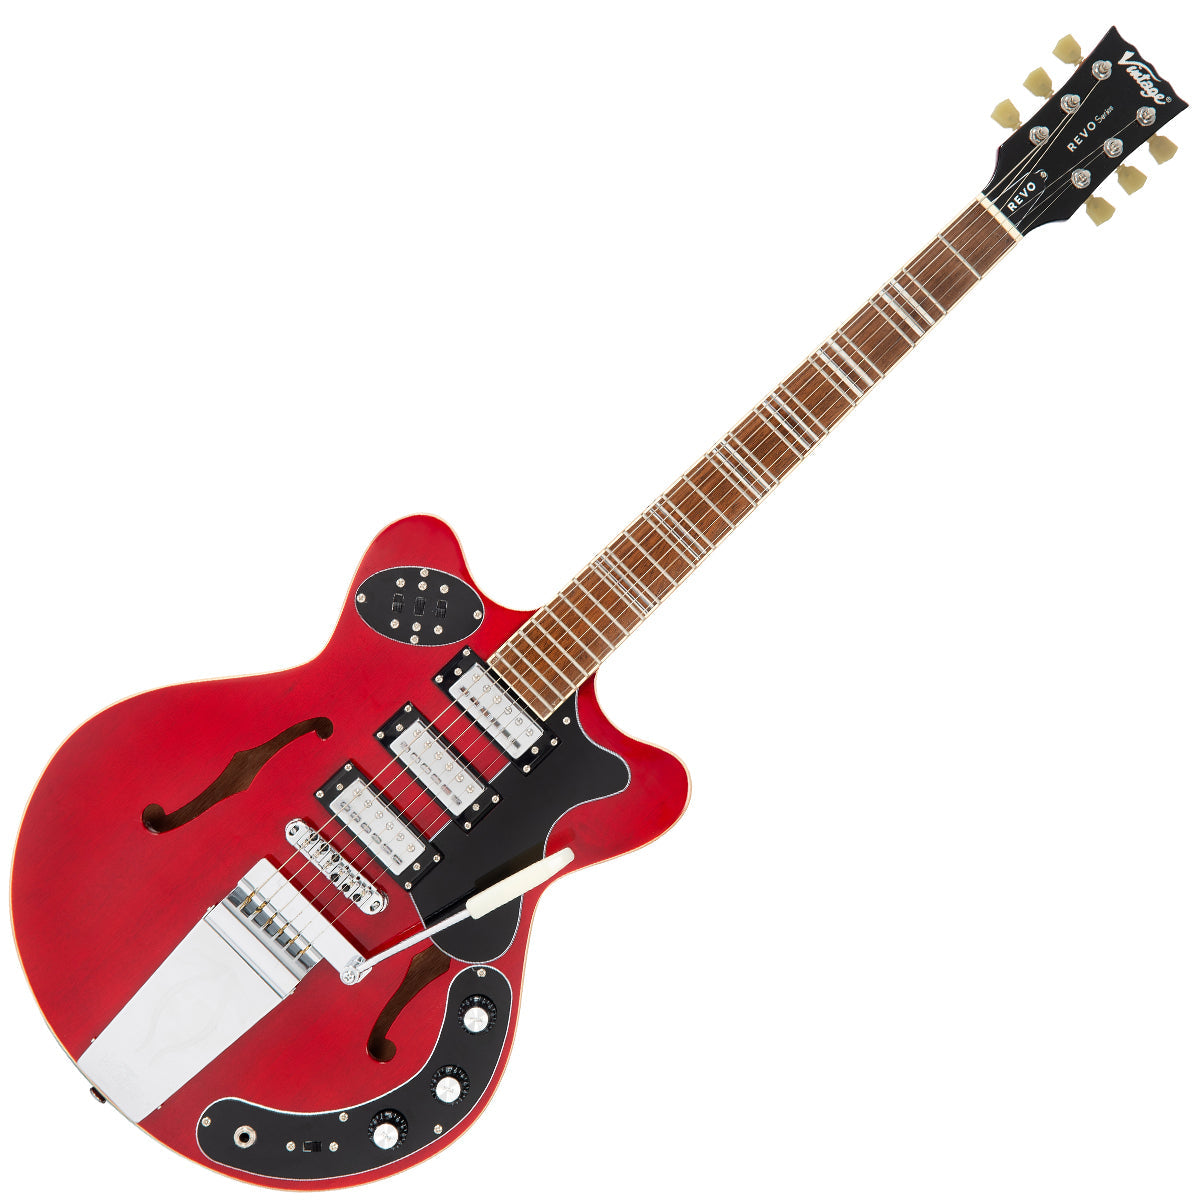 Vintage REVO Series 'Superthin' Guitar ~ Cherry Red, Electric Guitars for sale at Richards Guitars.